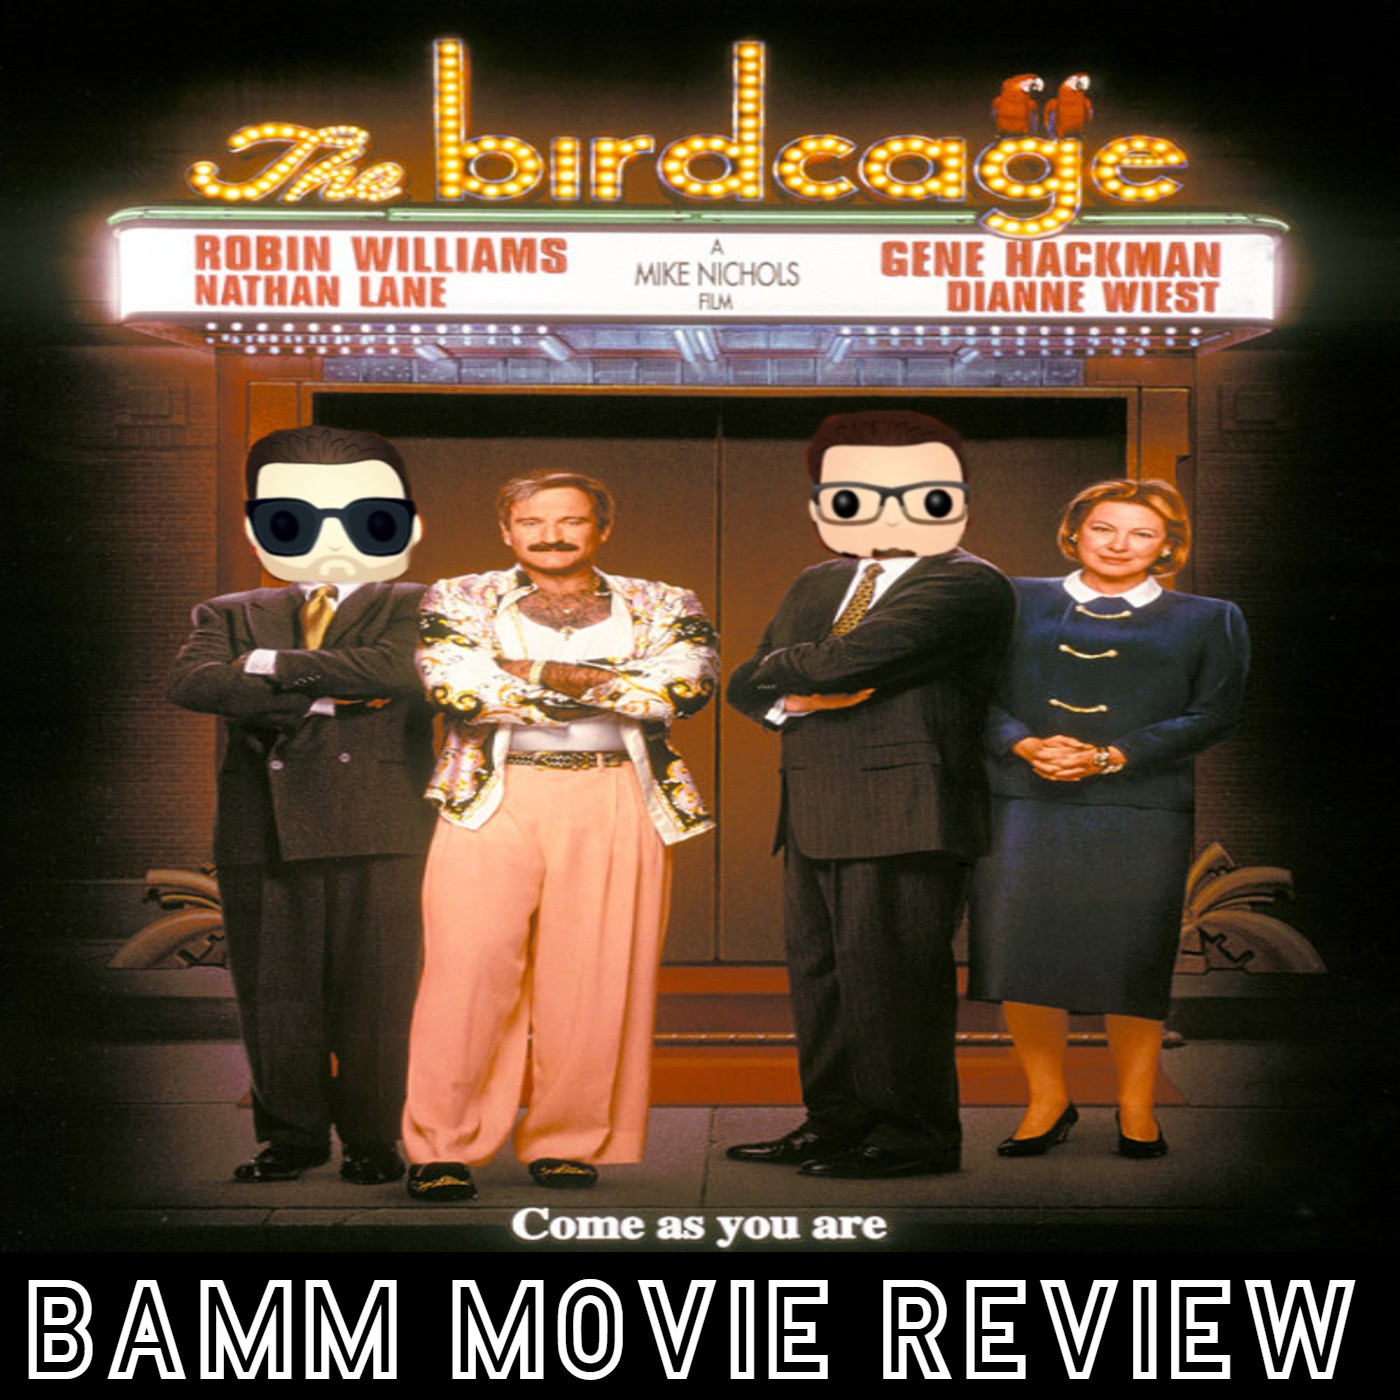 The Birdcage - Review